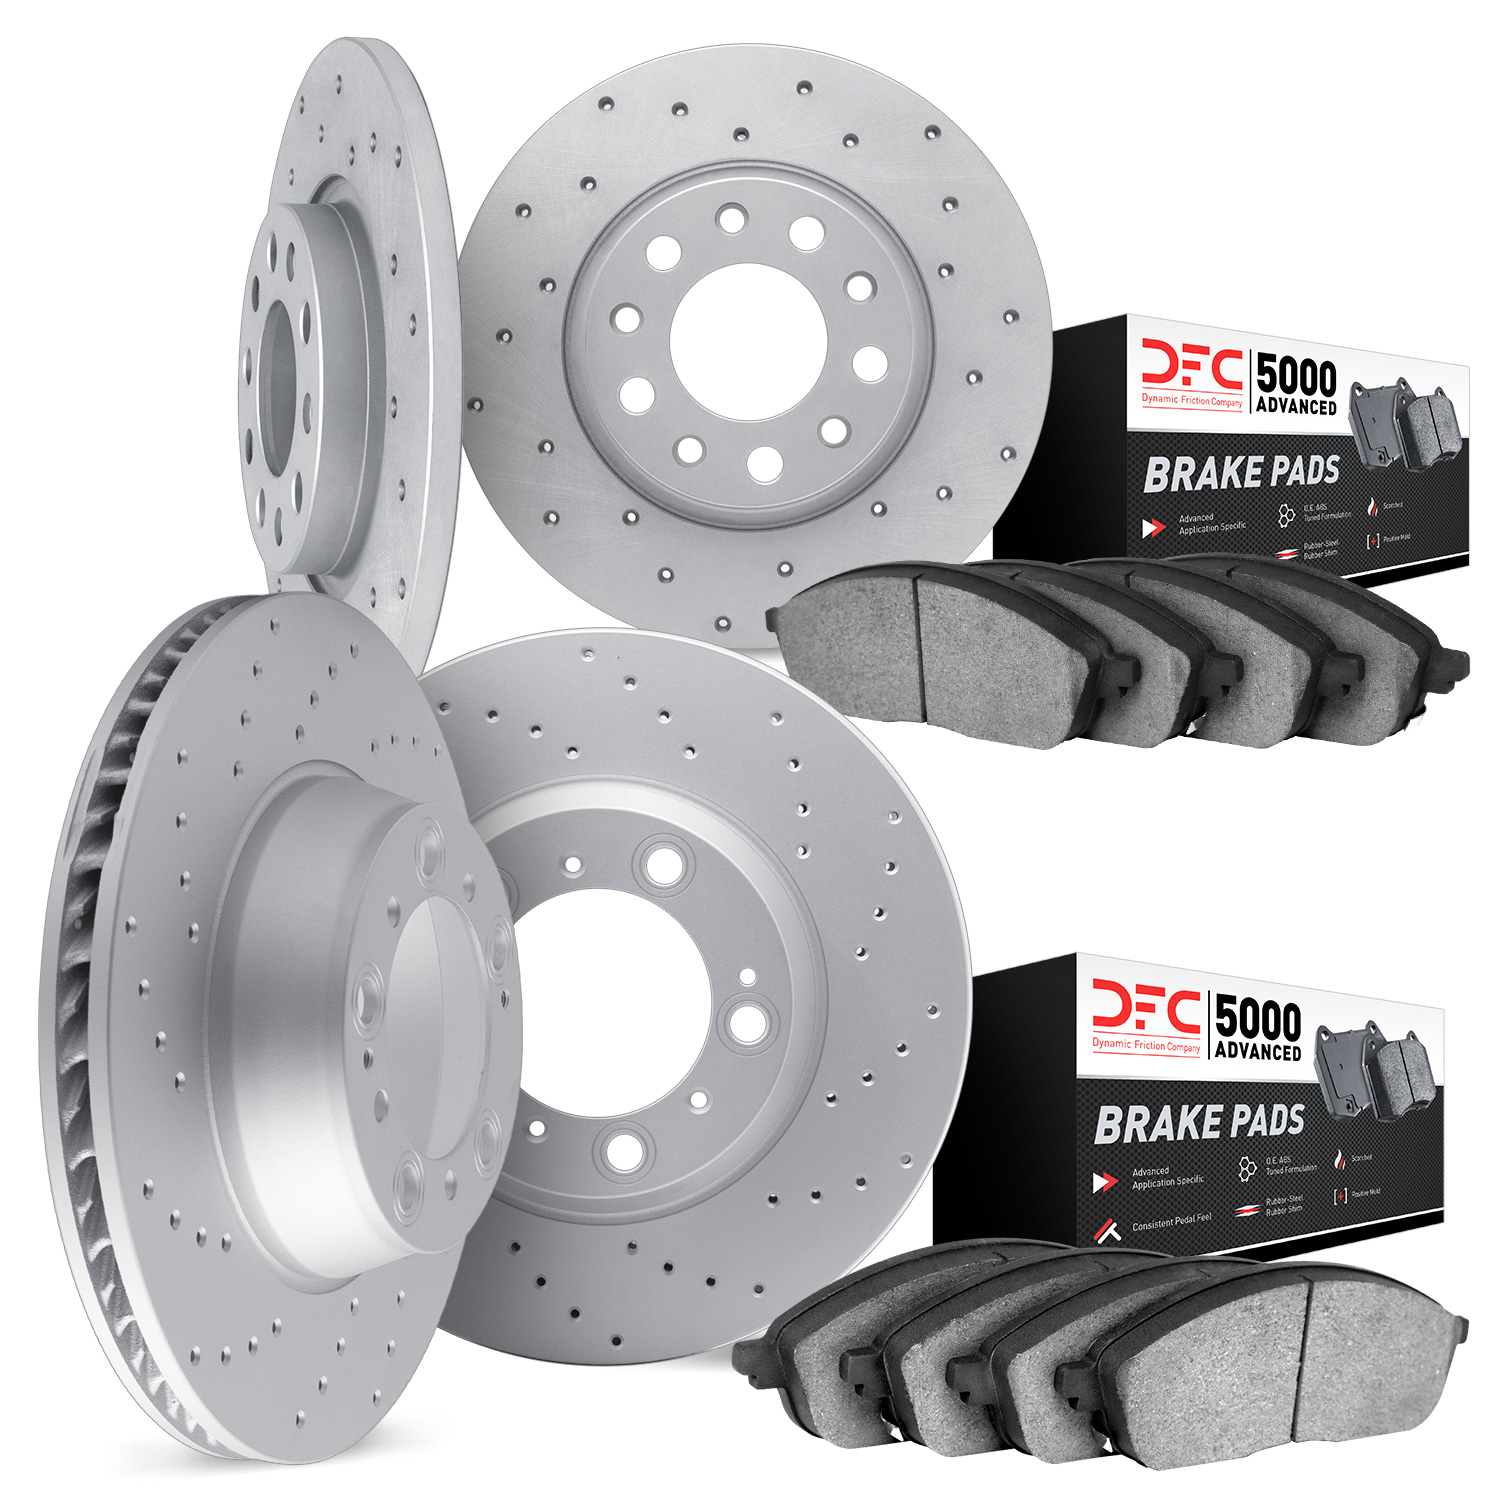 2704-59042 Geoperformance Drilled Brake Rotors with Active Performance Pads Kit, 2002-2006 Acura/Honda, Position: Front and Rear